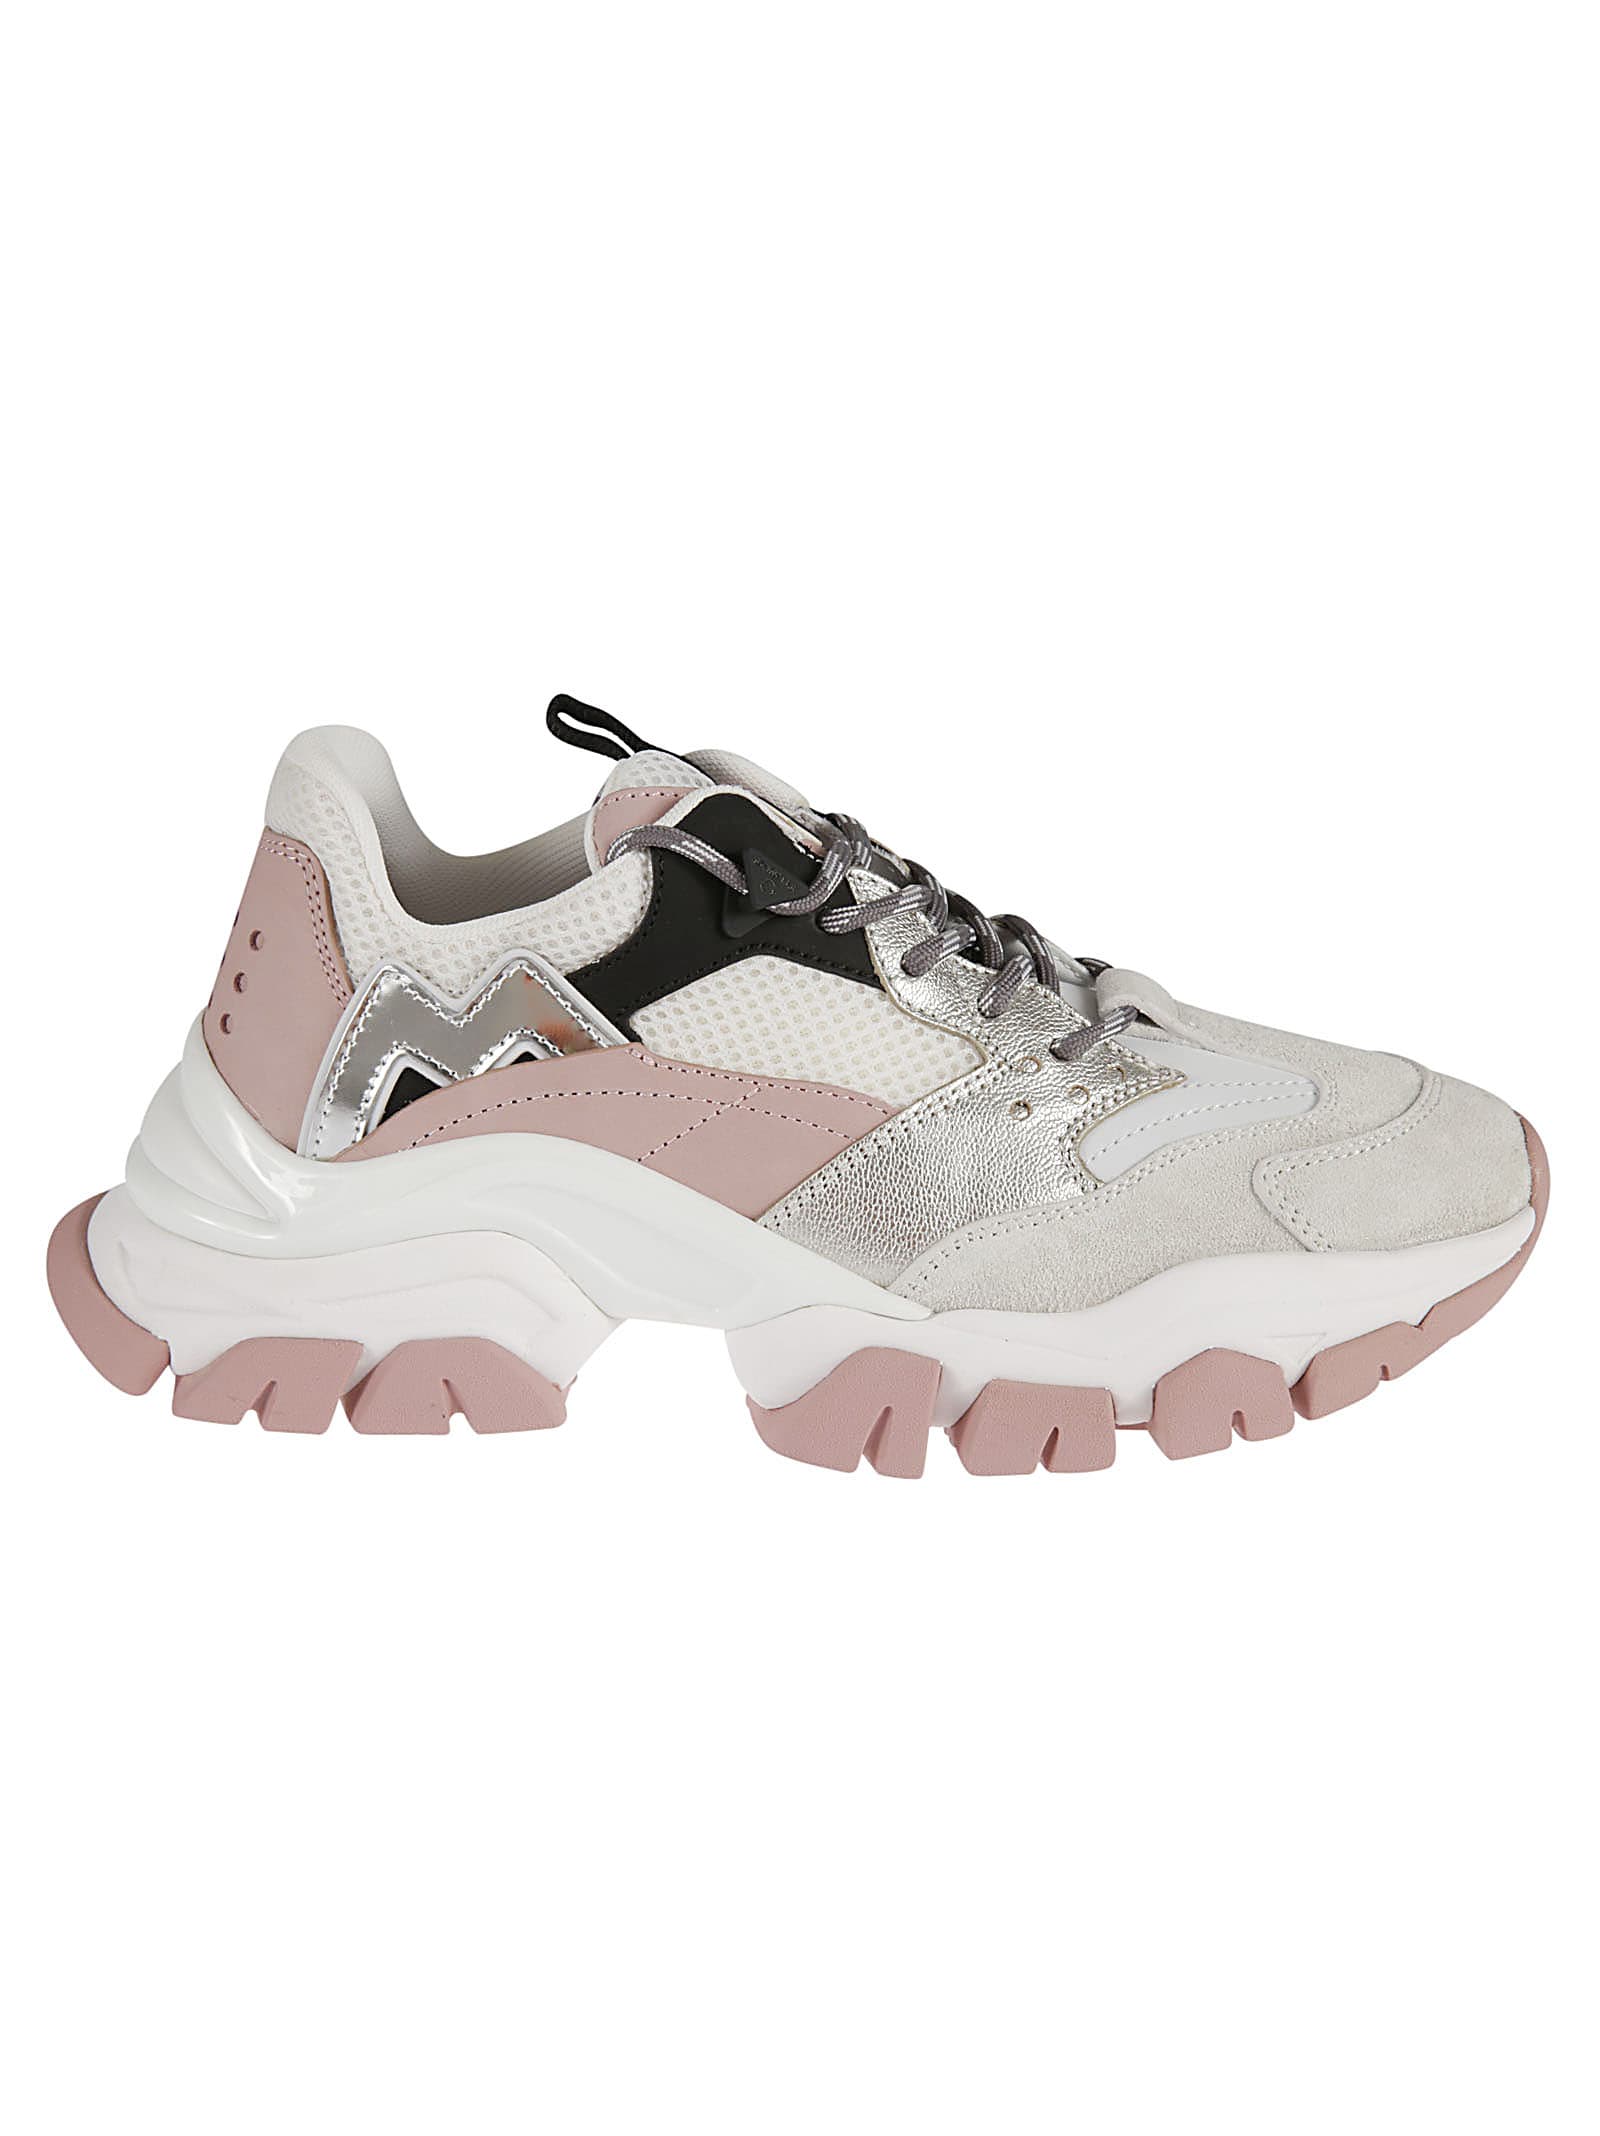 Moncler Leave No Trace Sneakers In White/pink